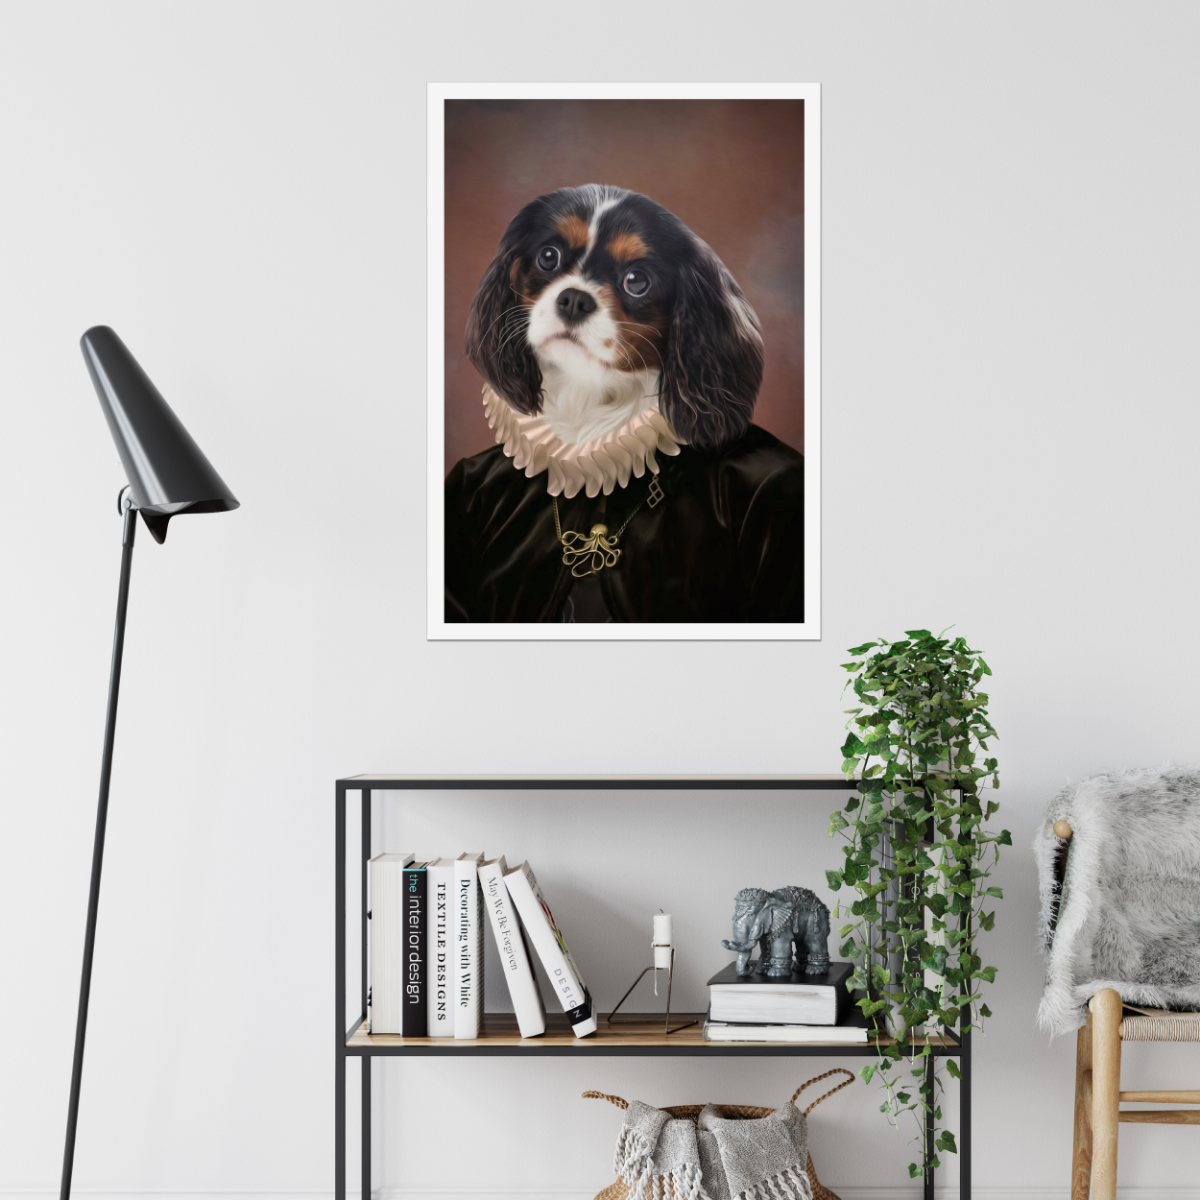 The Viscountess: Custom Pet Poster - Paw & Glory - #pet portraits# - #dog portraits# - #pet portraits uk#Paw & Glory, paw and glory, draw your pet portrait, dog astronaut photo, drawing pictures of pets, small dog portrait, best dog artists, minimal dog art, pet portraits